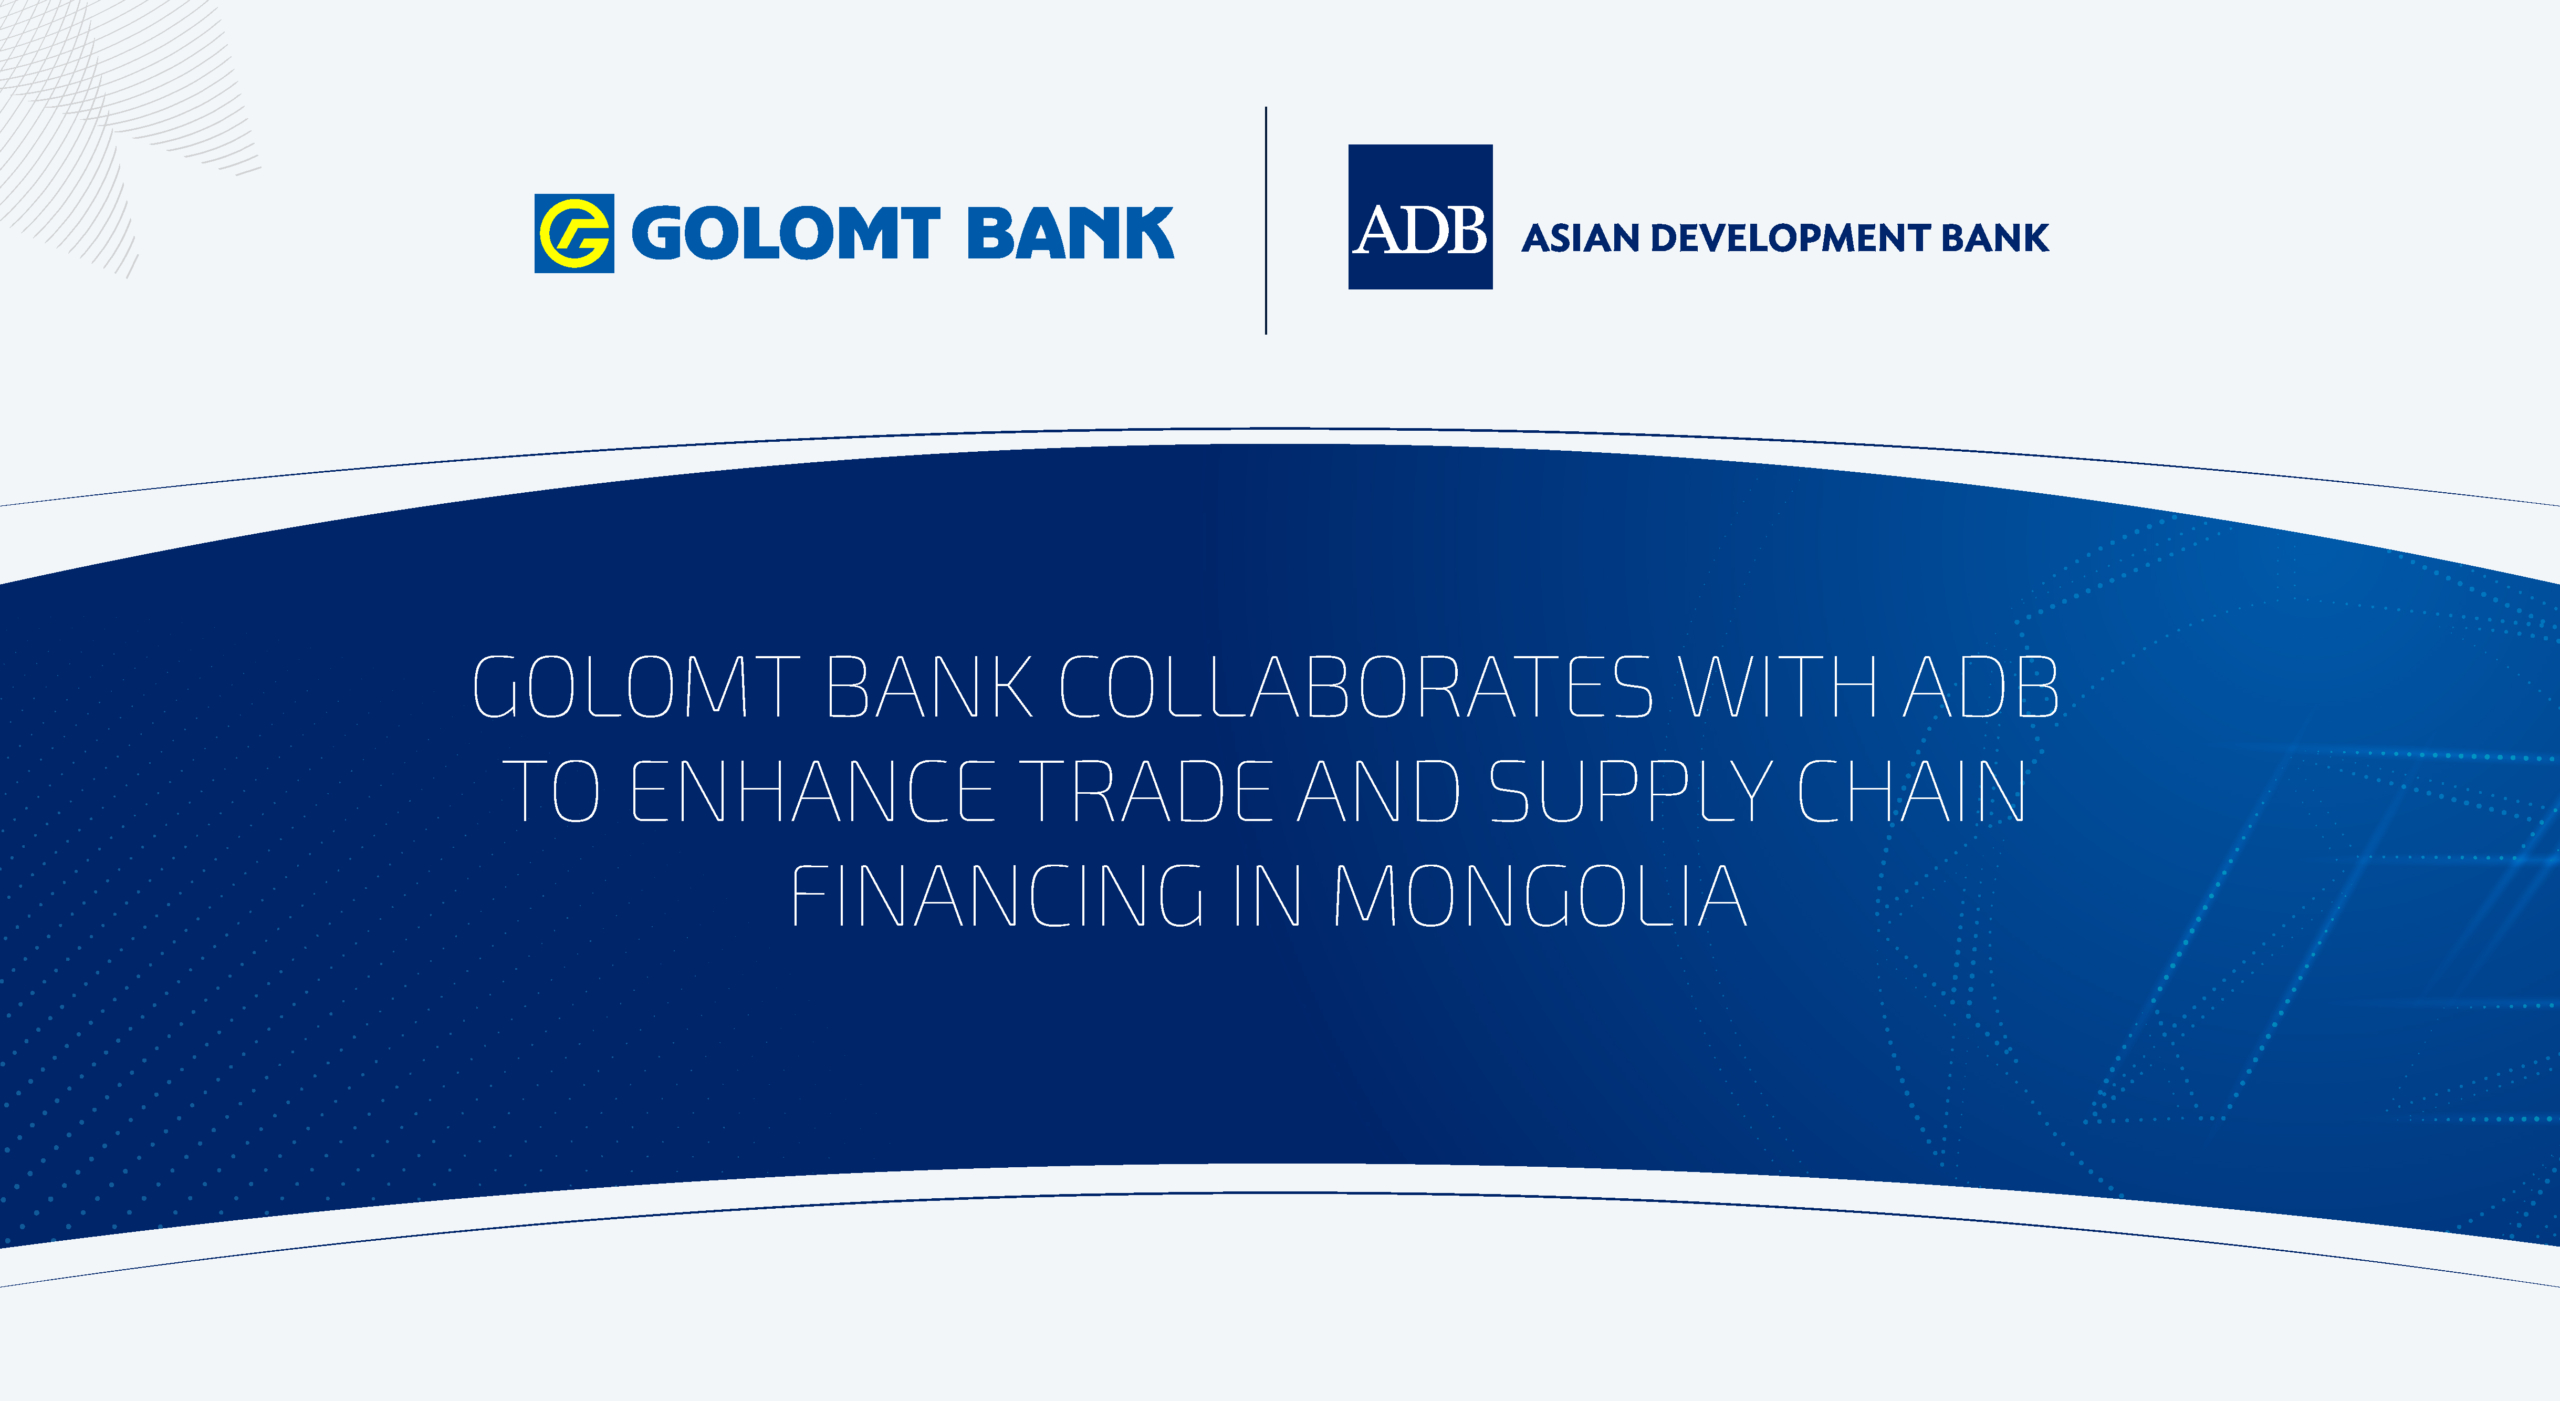 Golomt Bank collaborates with ADB to enhance Trade and Supply Chain Financing in Mongolia